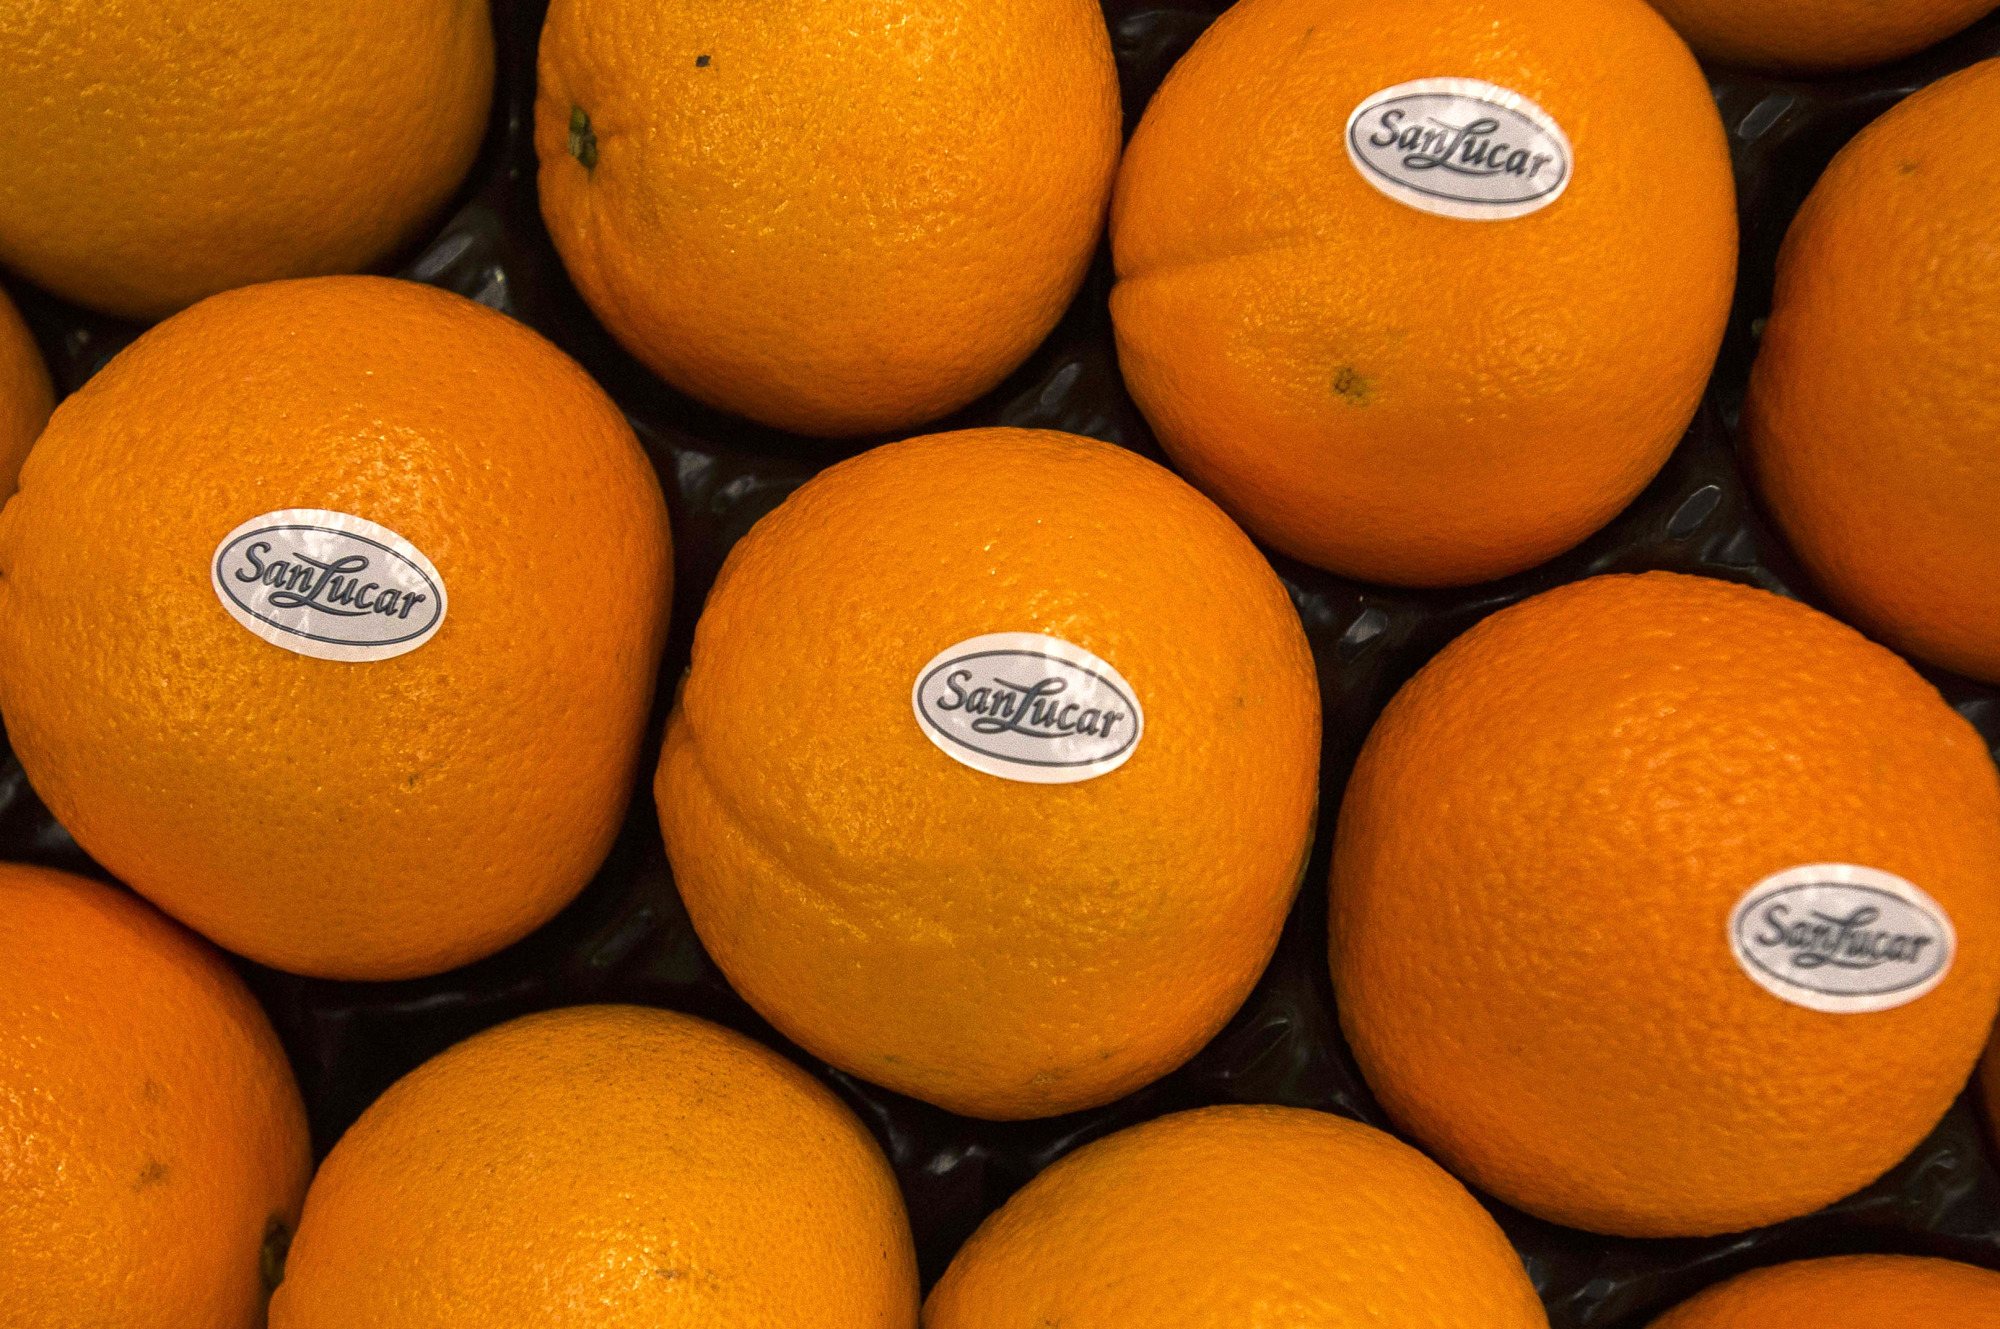 Oranges sit in shipping trays after labeling with SanLucar brand stickers at the packing plant operated by Antonio Llusar y Cia, S.A. in Chilches, Spain, on Monday, Feb. 6, 2017. Spain's citrus output is seen up 20% on good weather.
